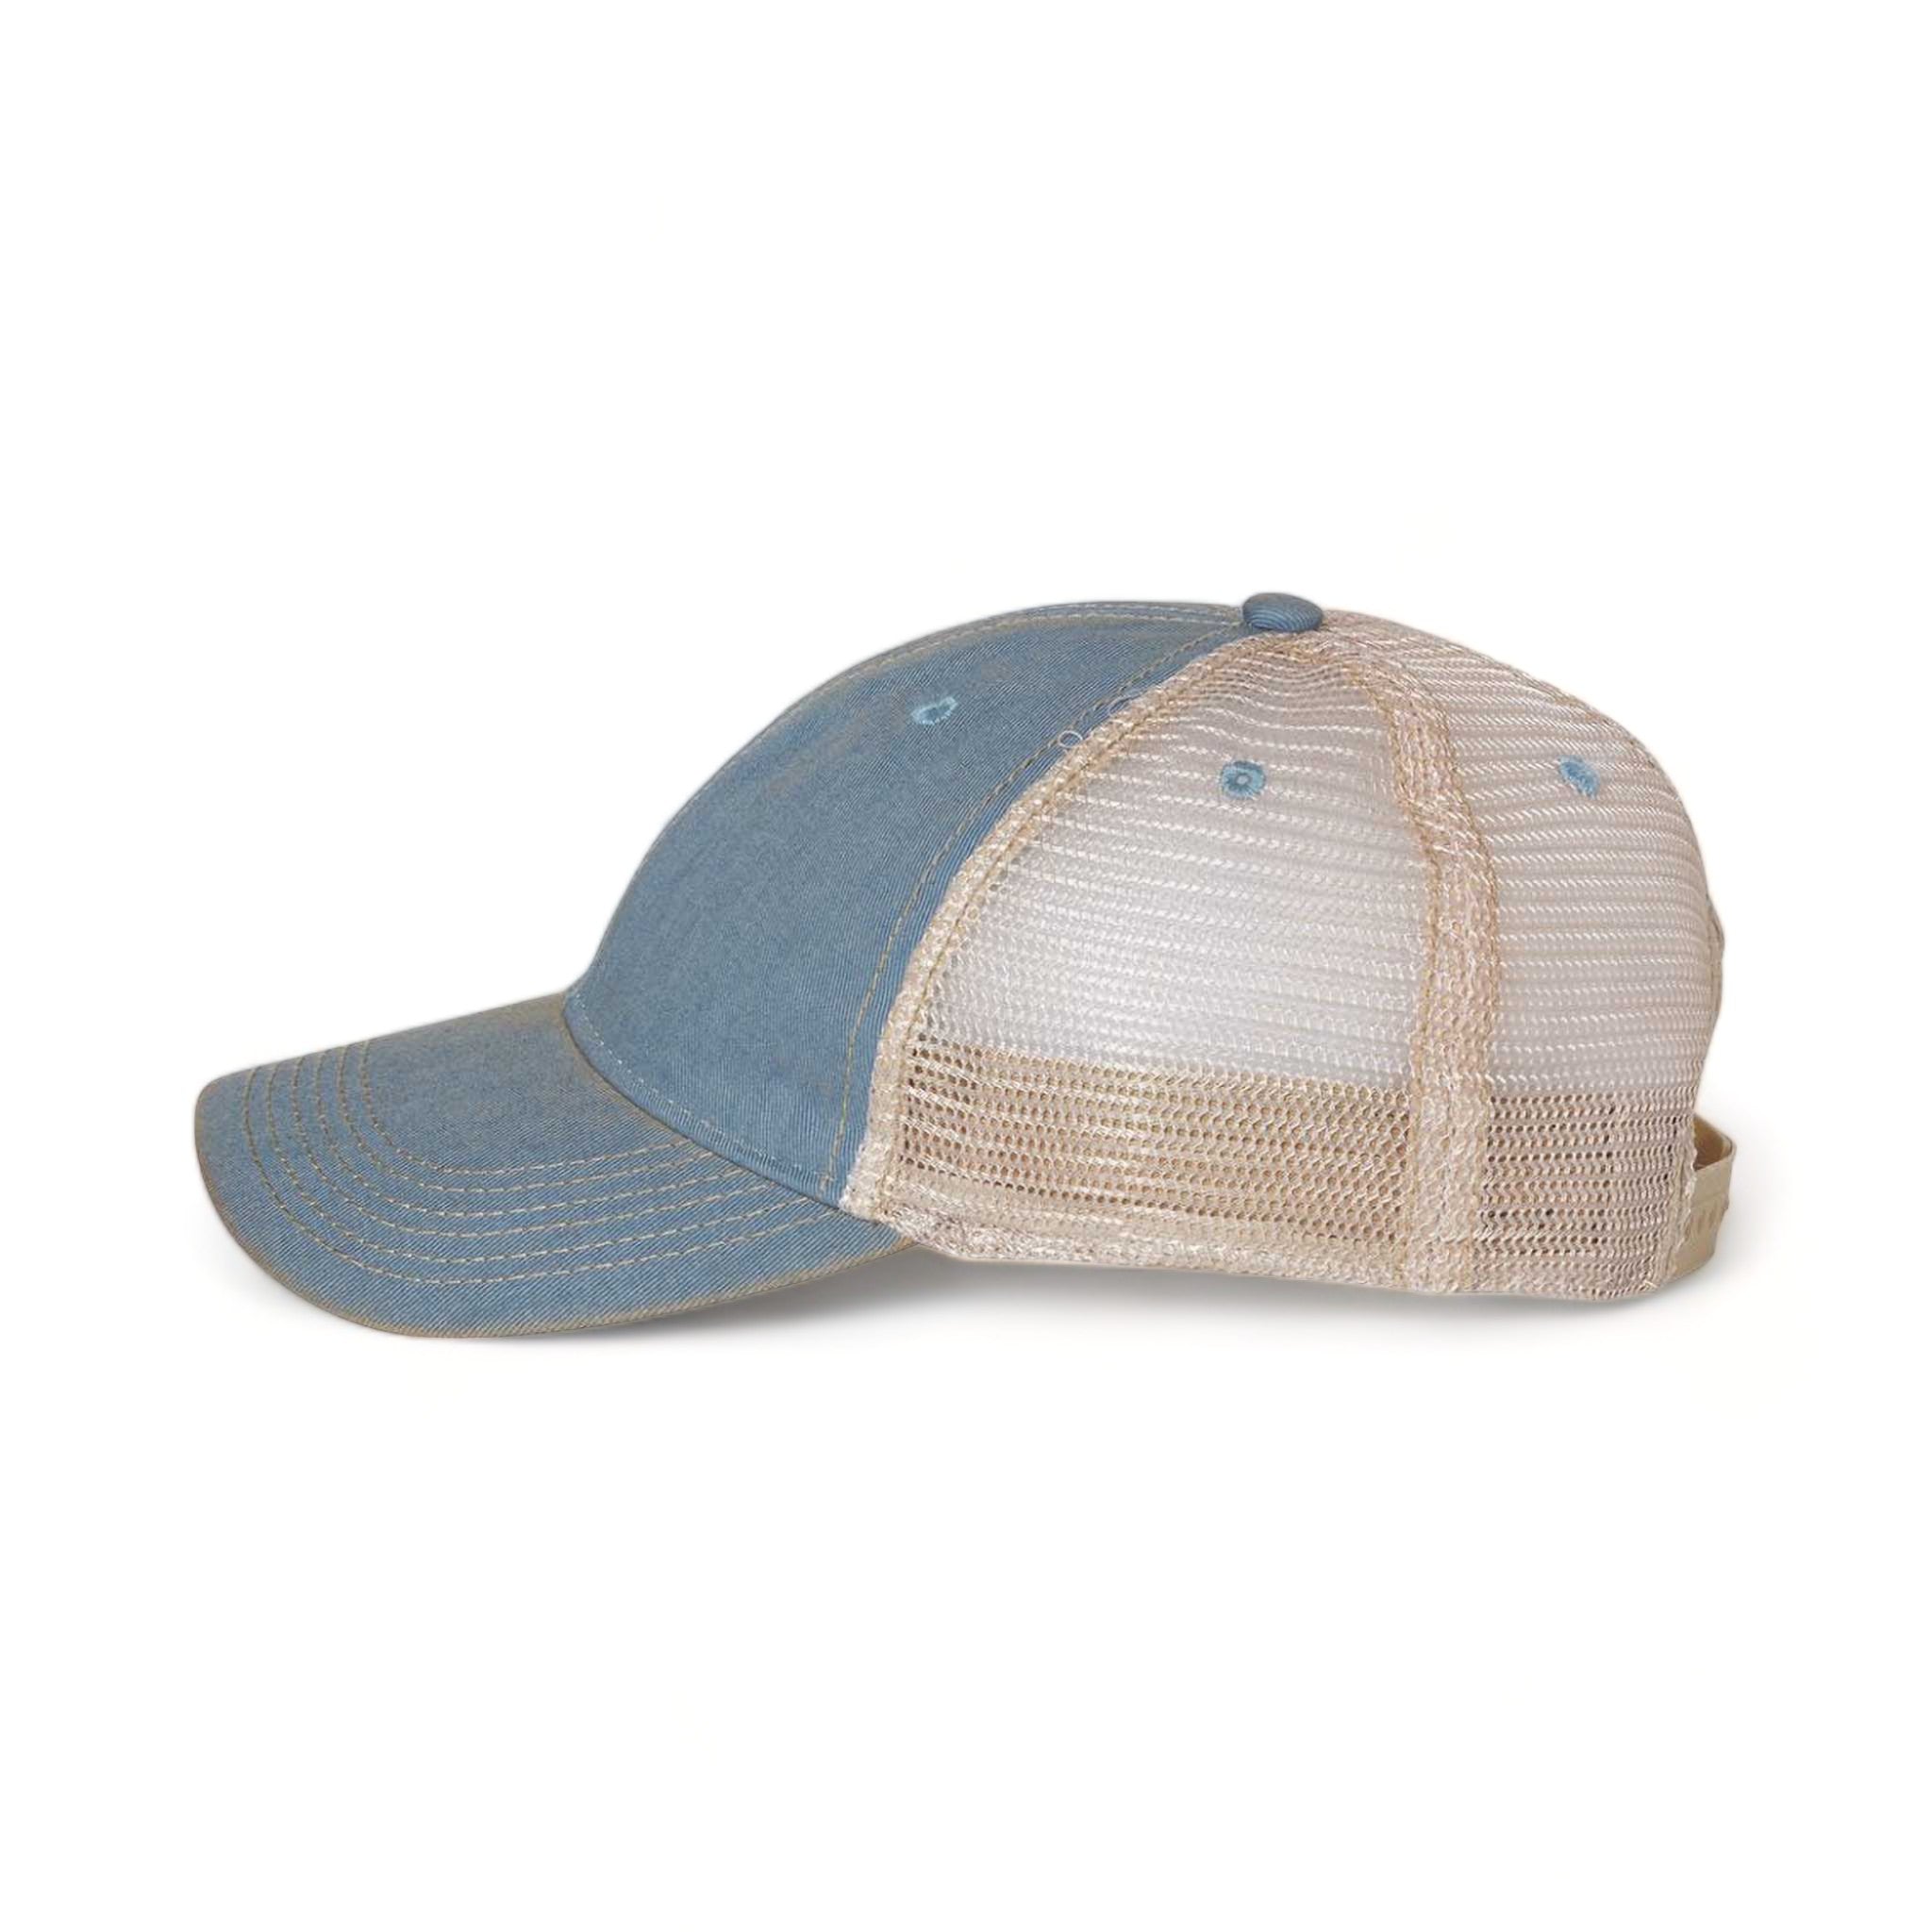 Side view of LEGACY OFA custom hat in light blue and khaki